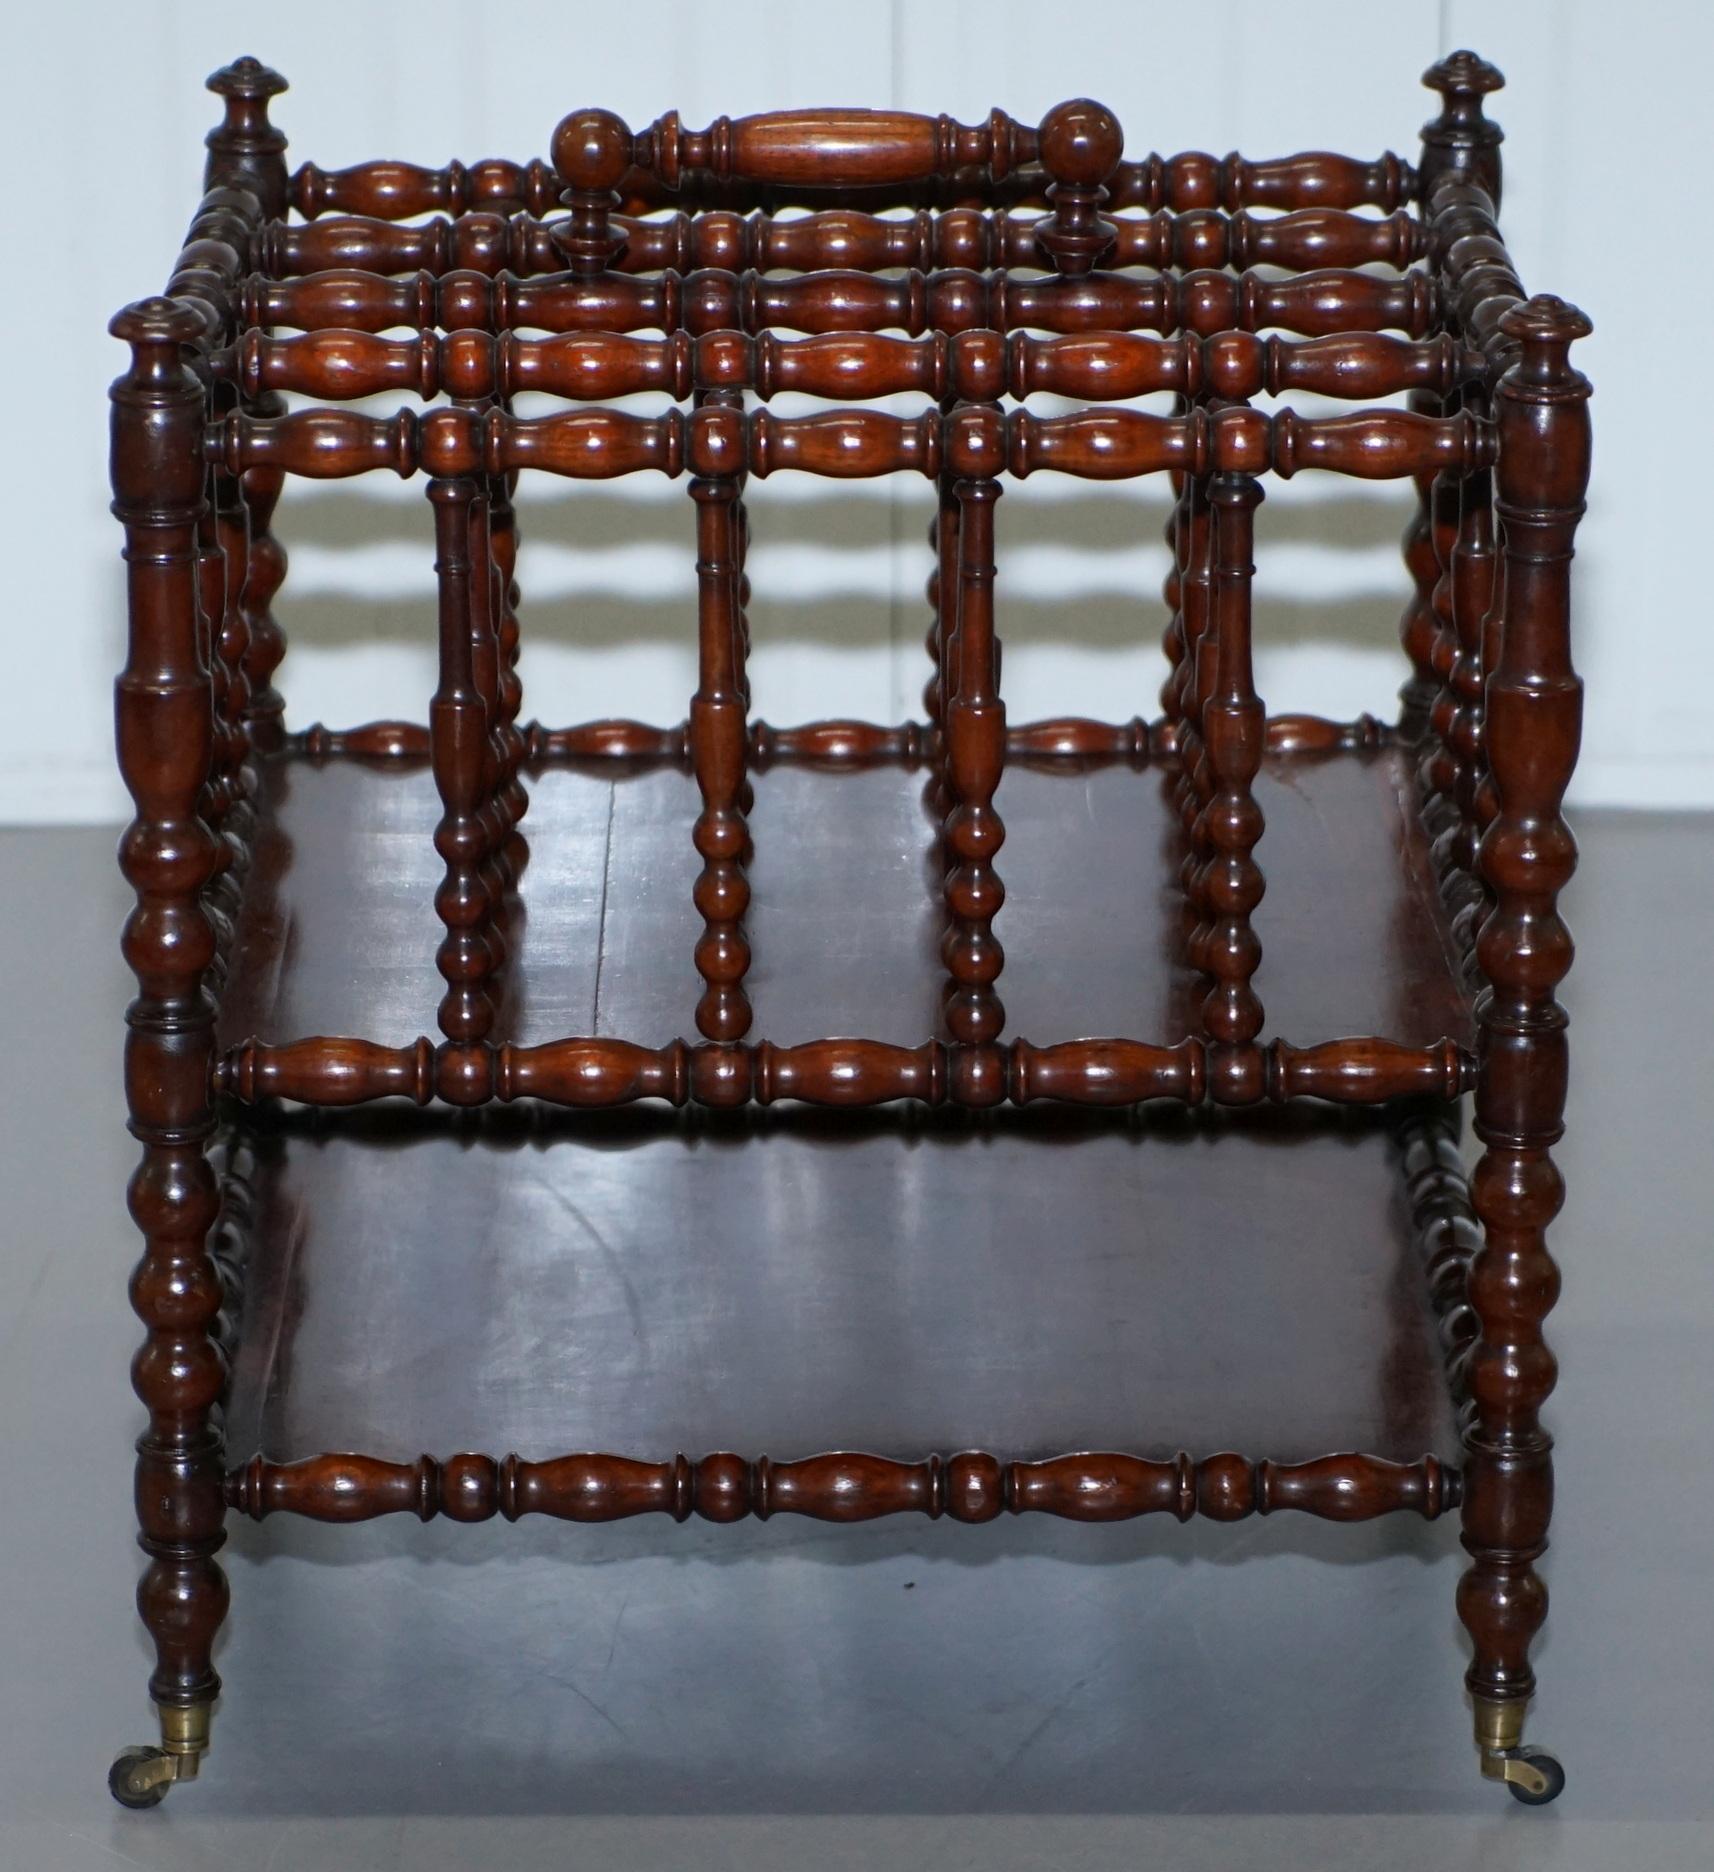 We are delighted to this very rare solid Fruitwood Napoleon III Canterbury music stand with ornate bobbin turning all over and original castors

A good looking rare and valuable piece of furniture, these sell for a small fortune in fully restored